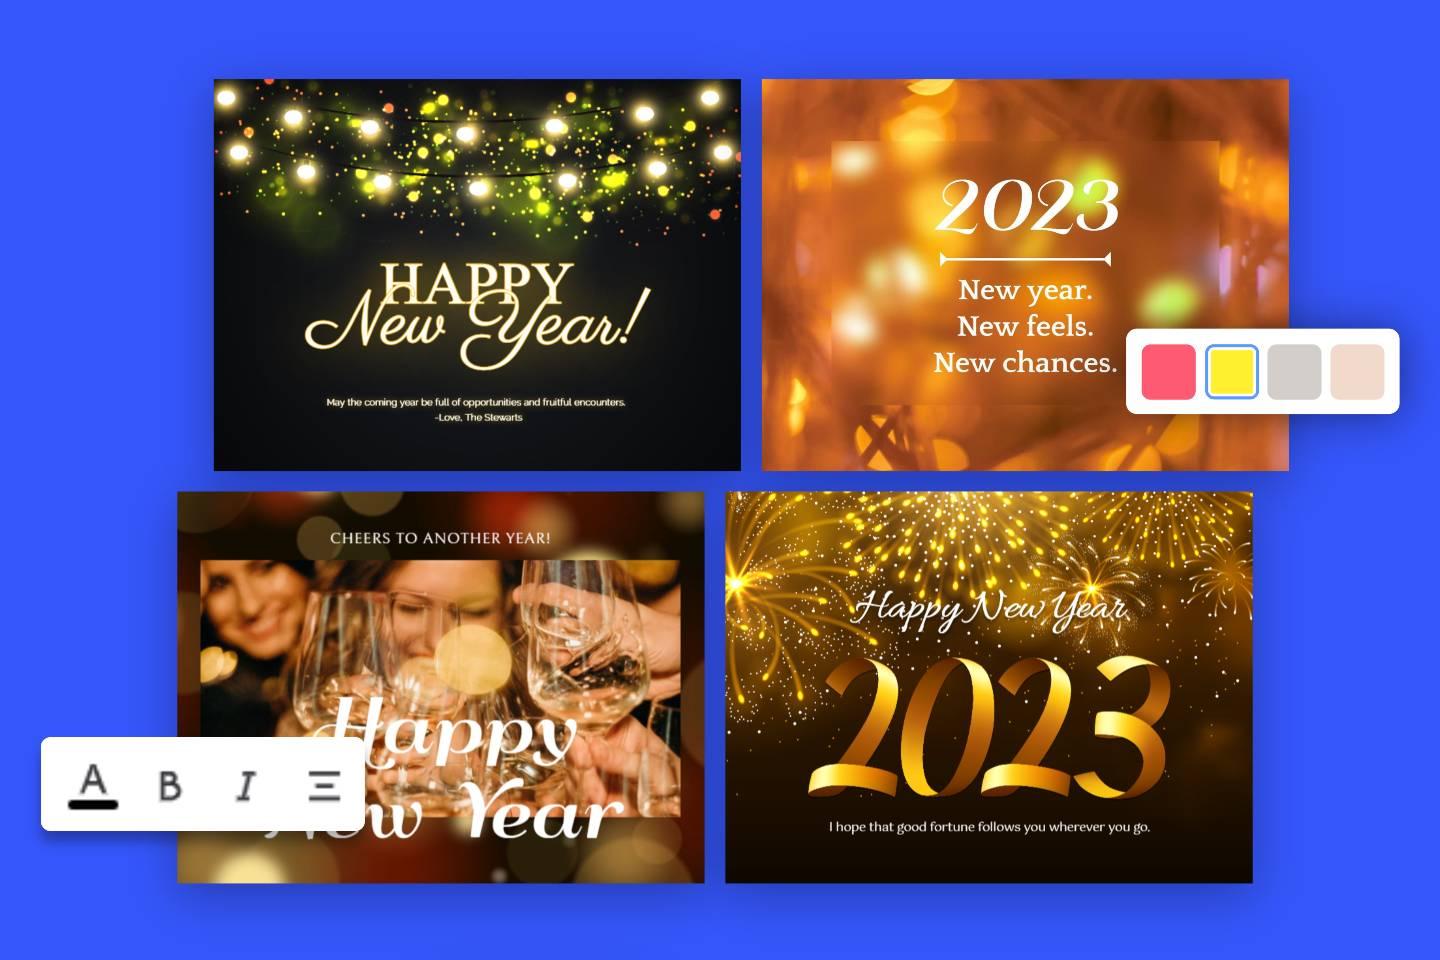 Happy New Year 2023: Welcome the year with these wishes, messages